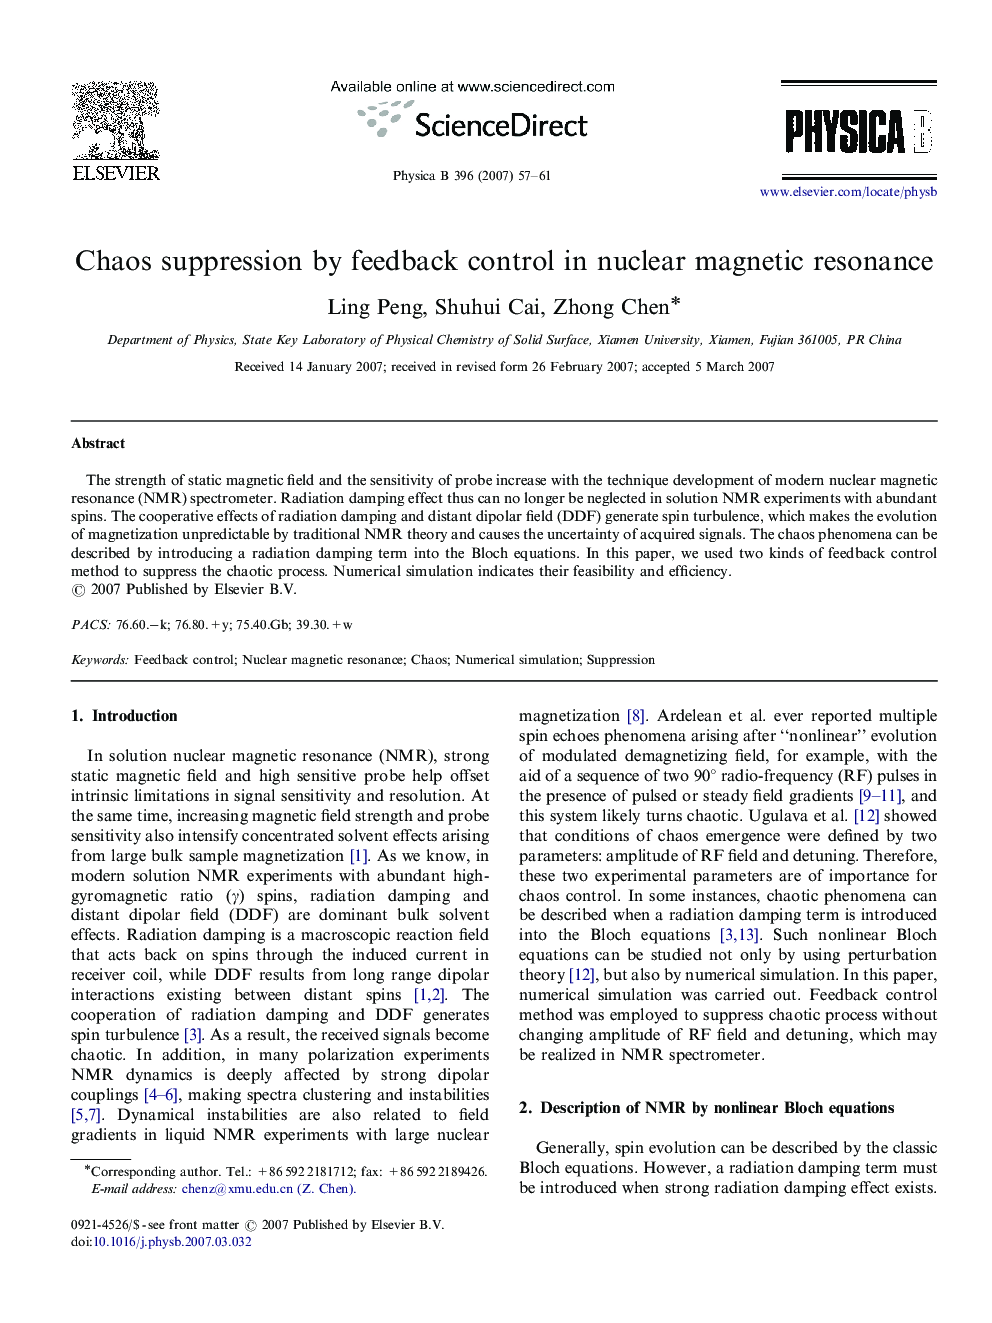 Chaos suppression by feedback control in nuclear magnetic resonance